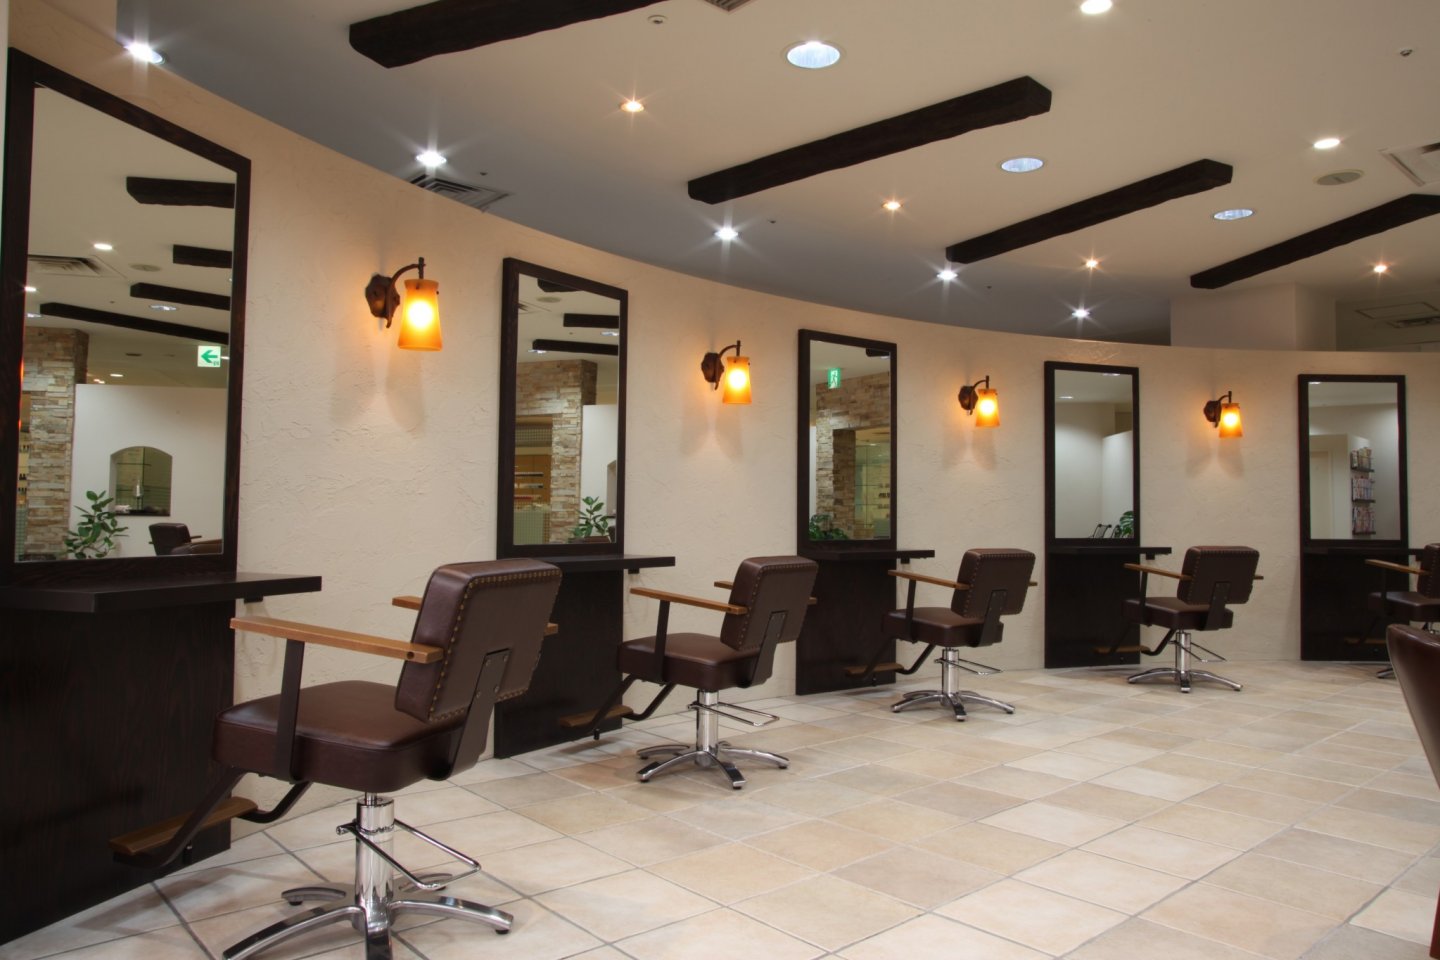 The salon offers a spacious and relaxing environment